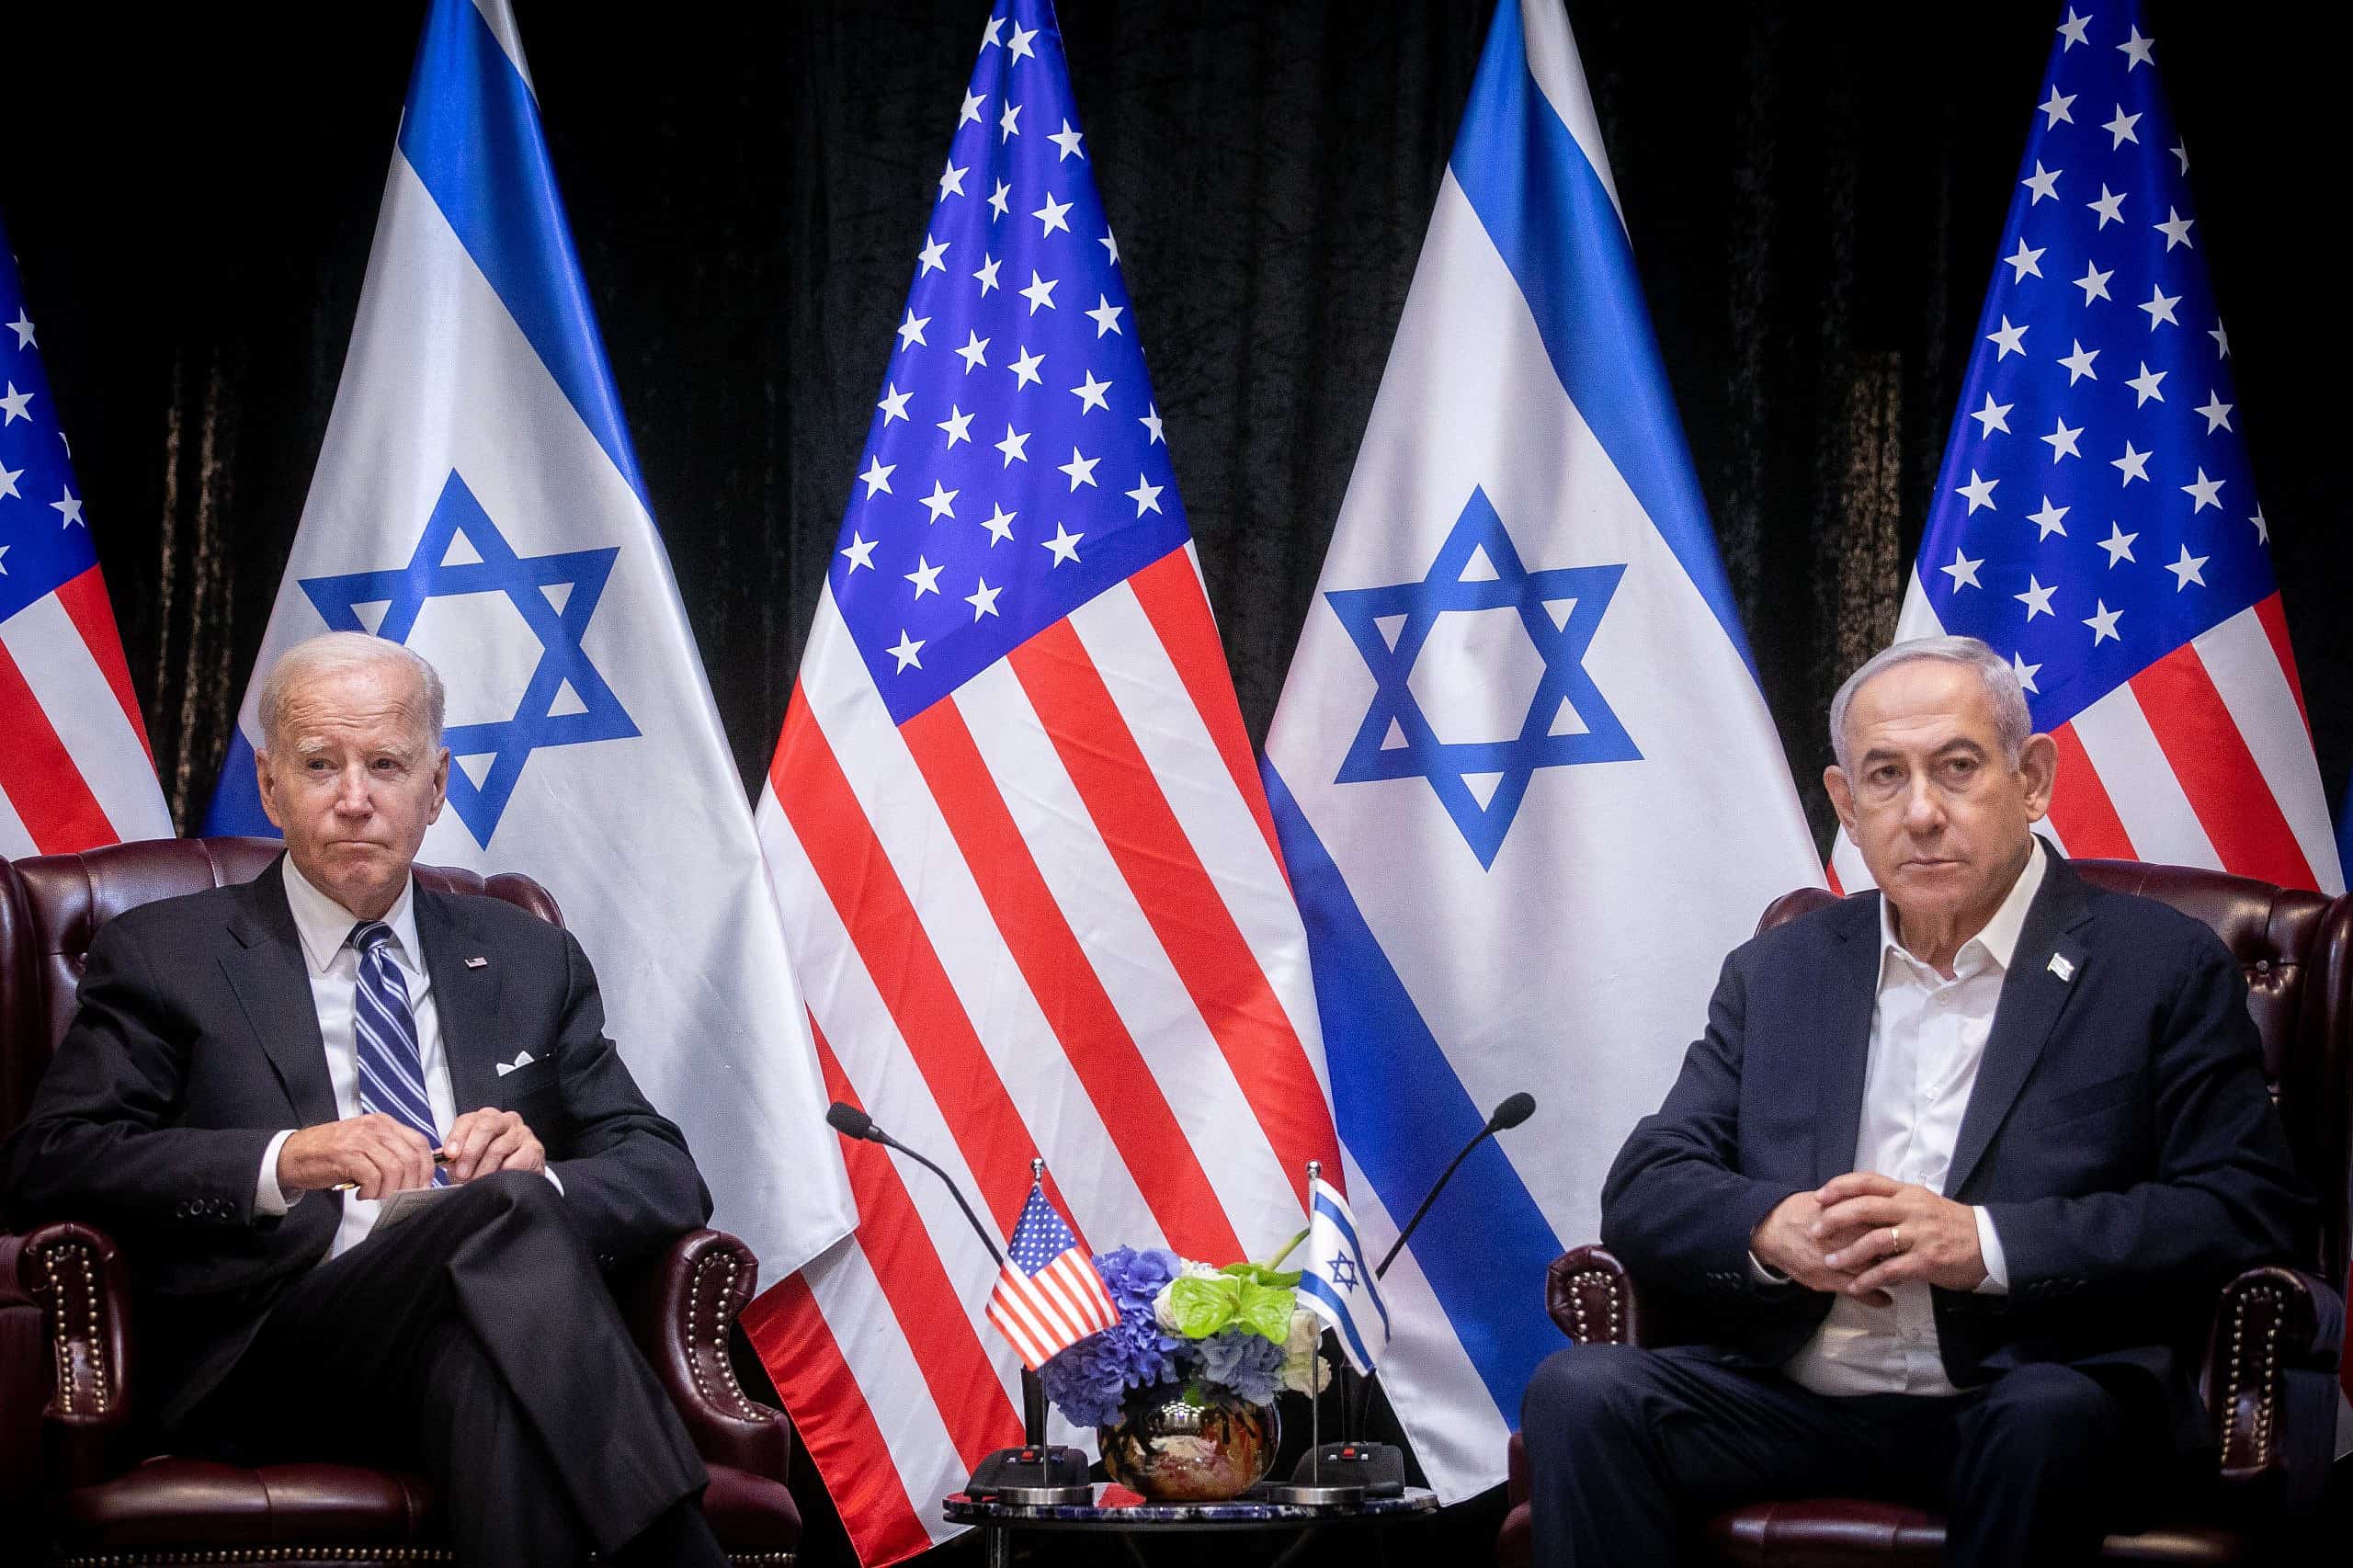 Netanyahu to Biden: Impossible to complete victory without entering Rafah